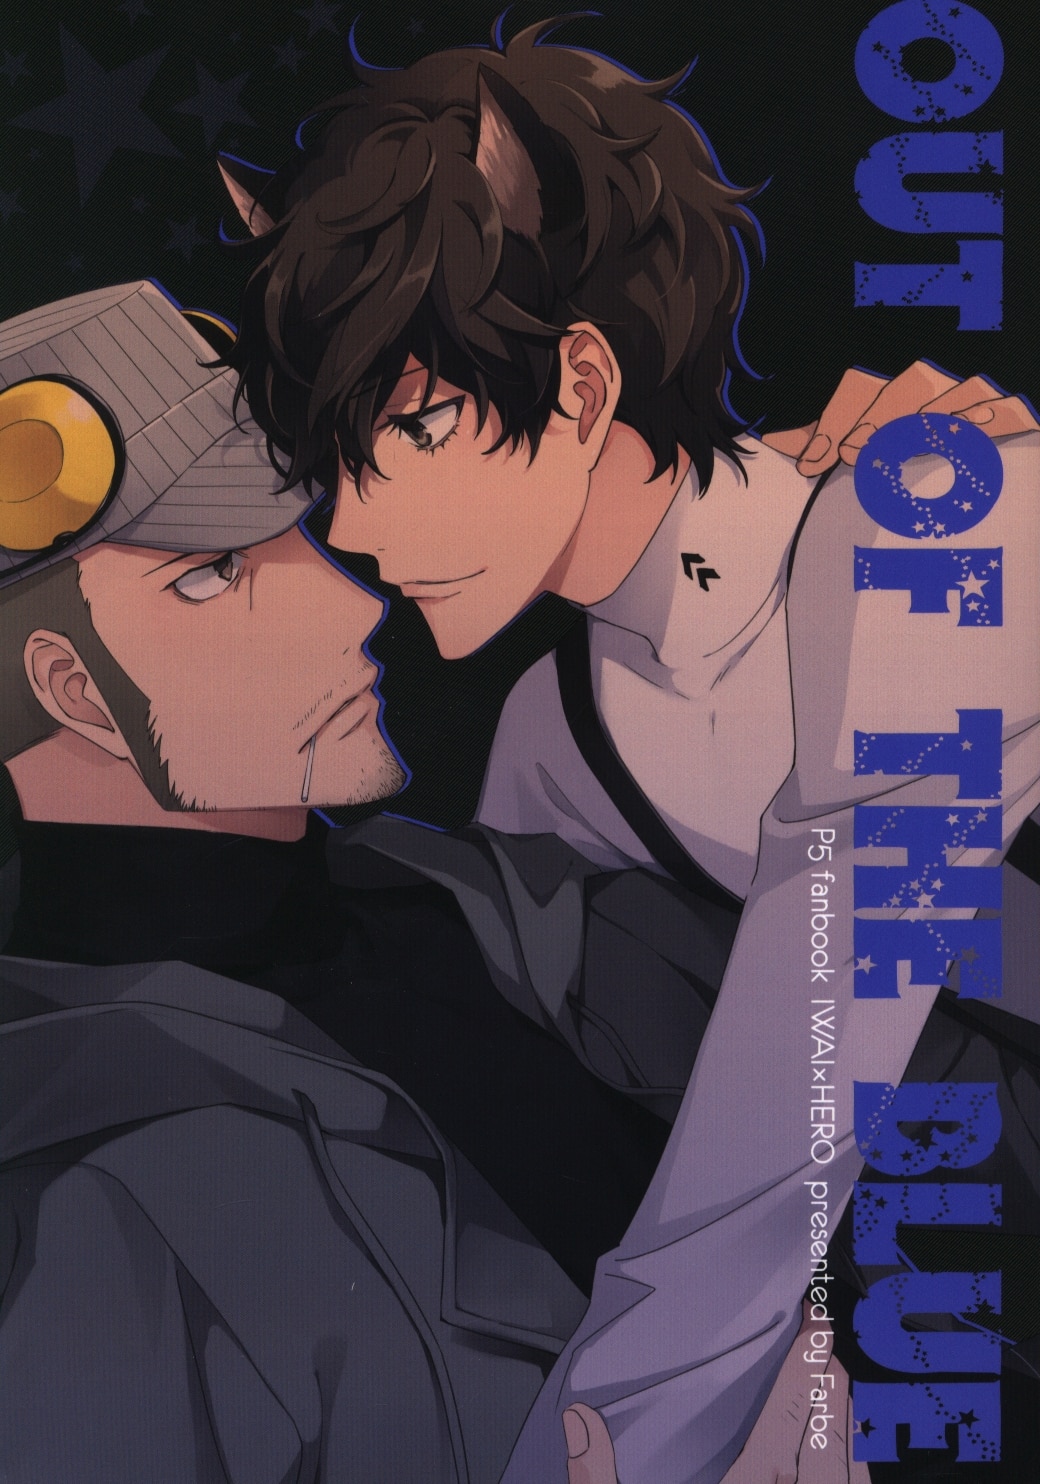 Doujinshi - Persona5 / Iwai Munehisa x Protagonist (Persona 5) (OUT OF THE BLUE) / Farbe